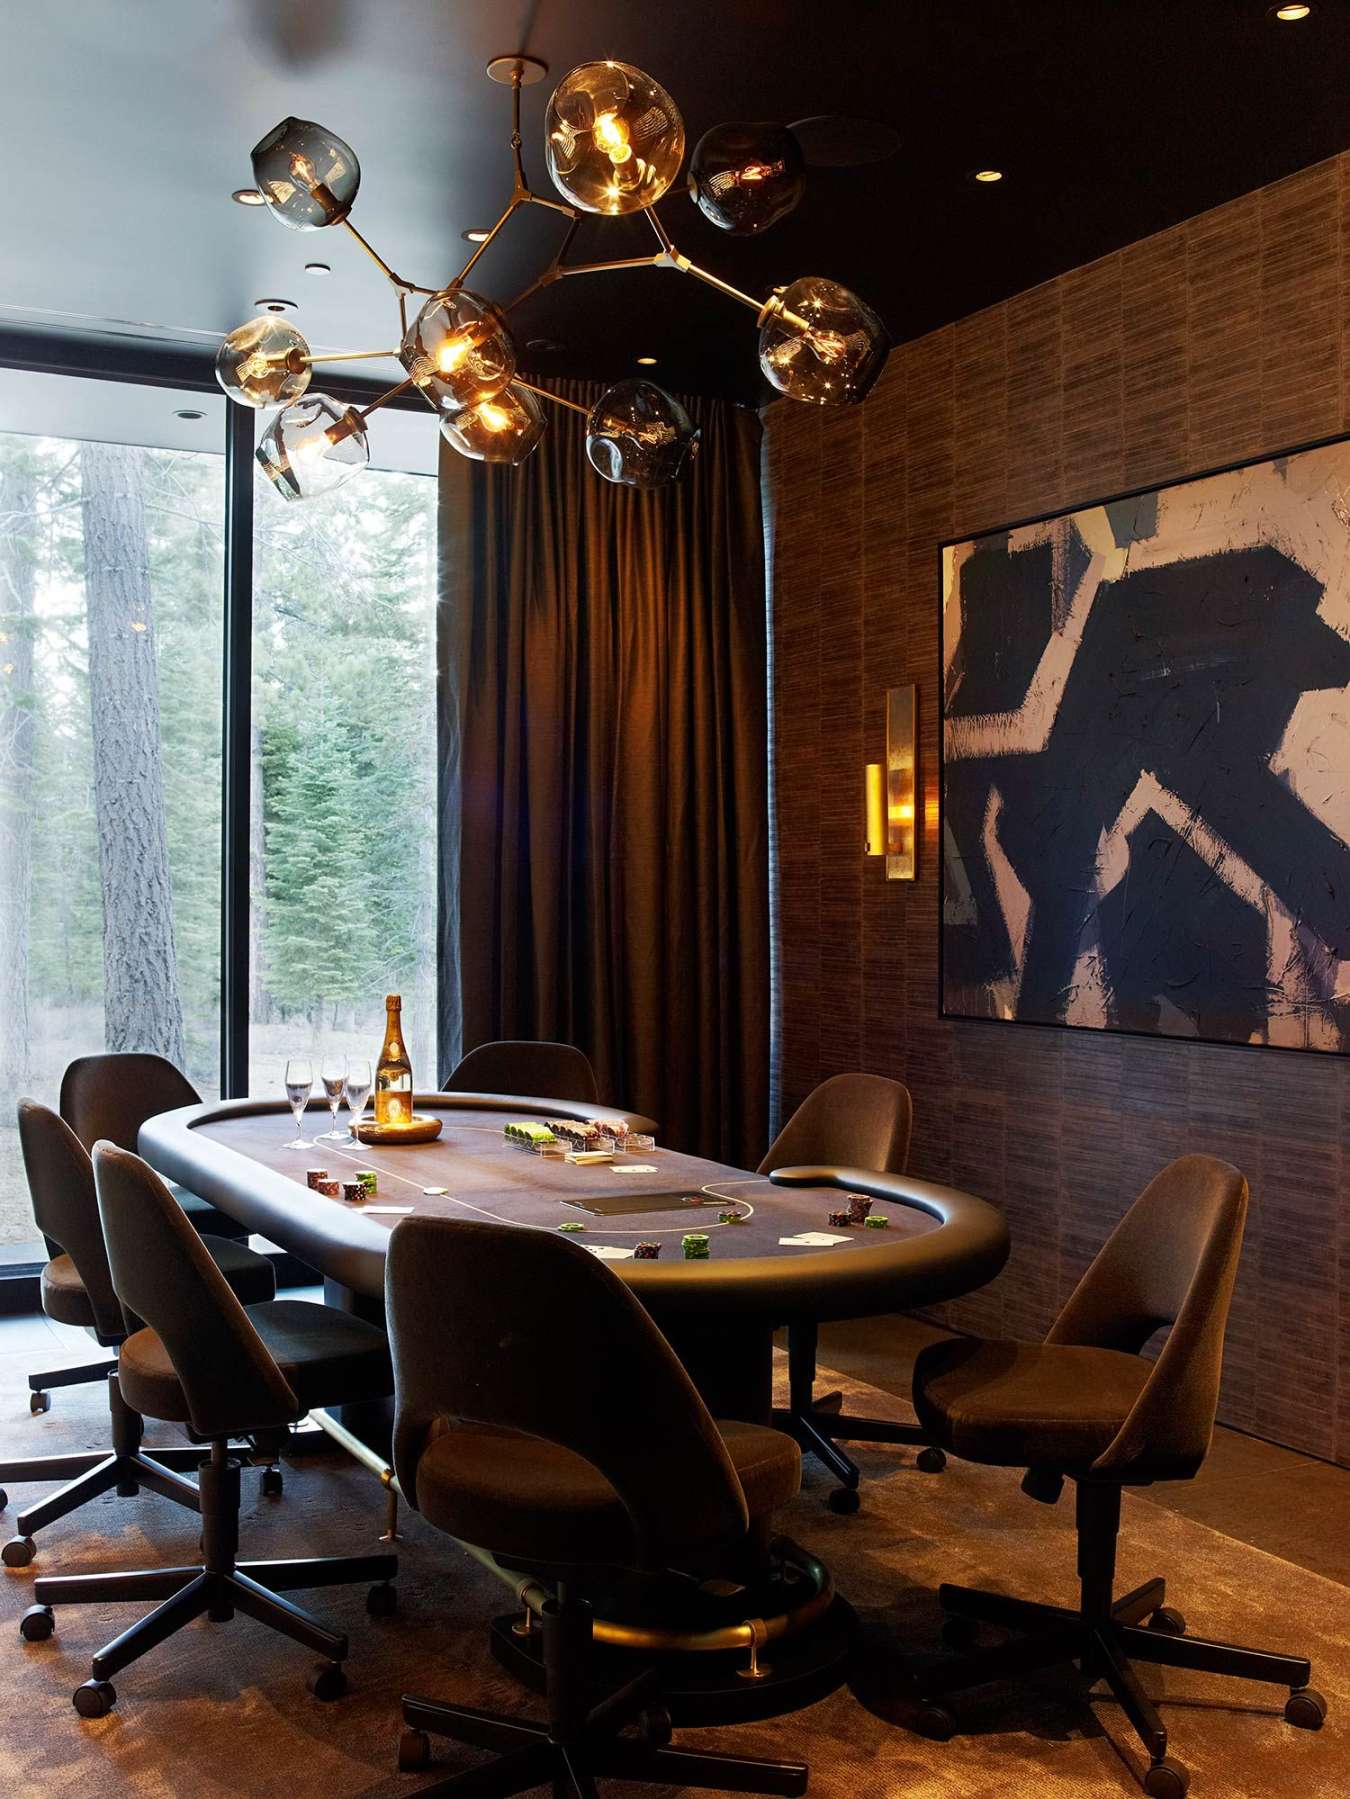 Modernist refuge of stone, wood, steel and glass in Martis Camp